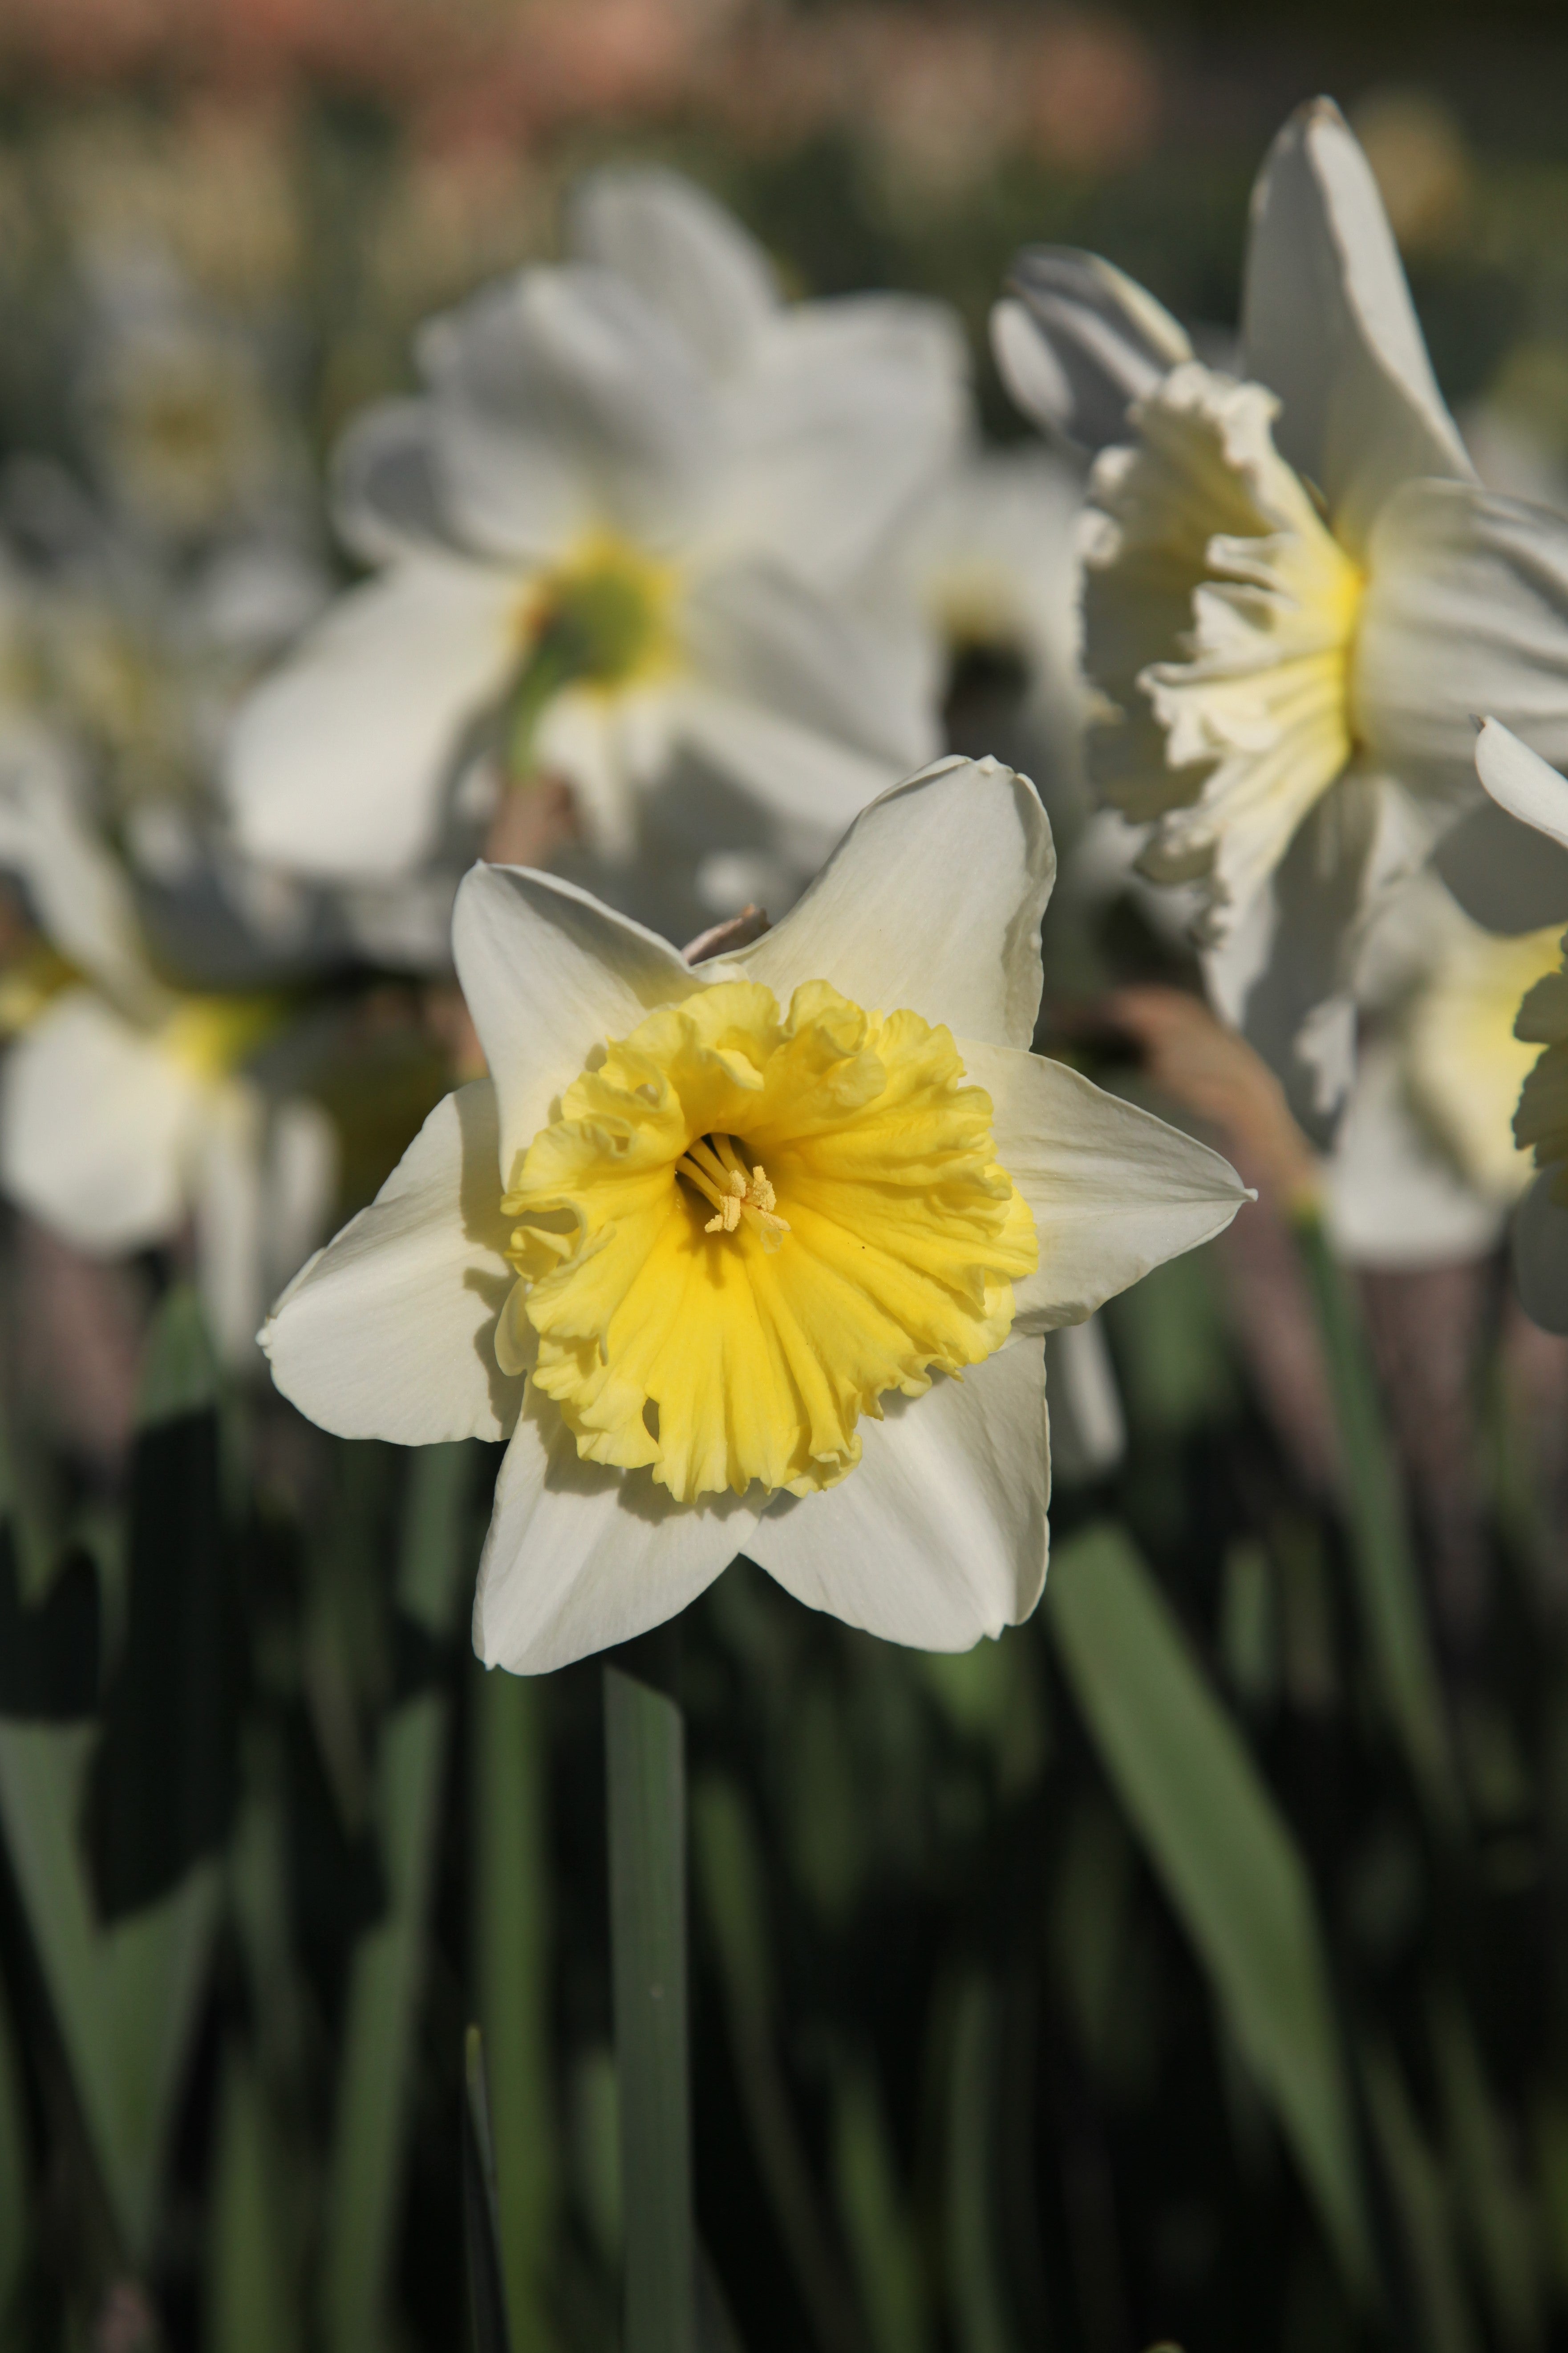 Daffodil Ice follies in full bloom with white petals and yellow cup